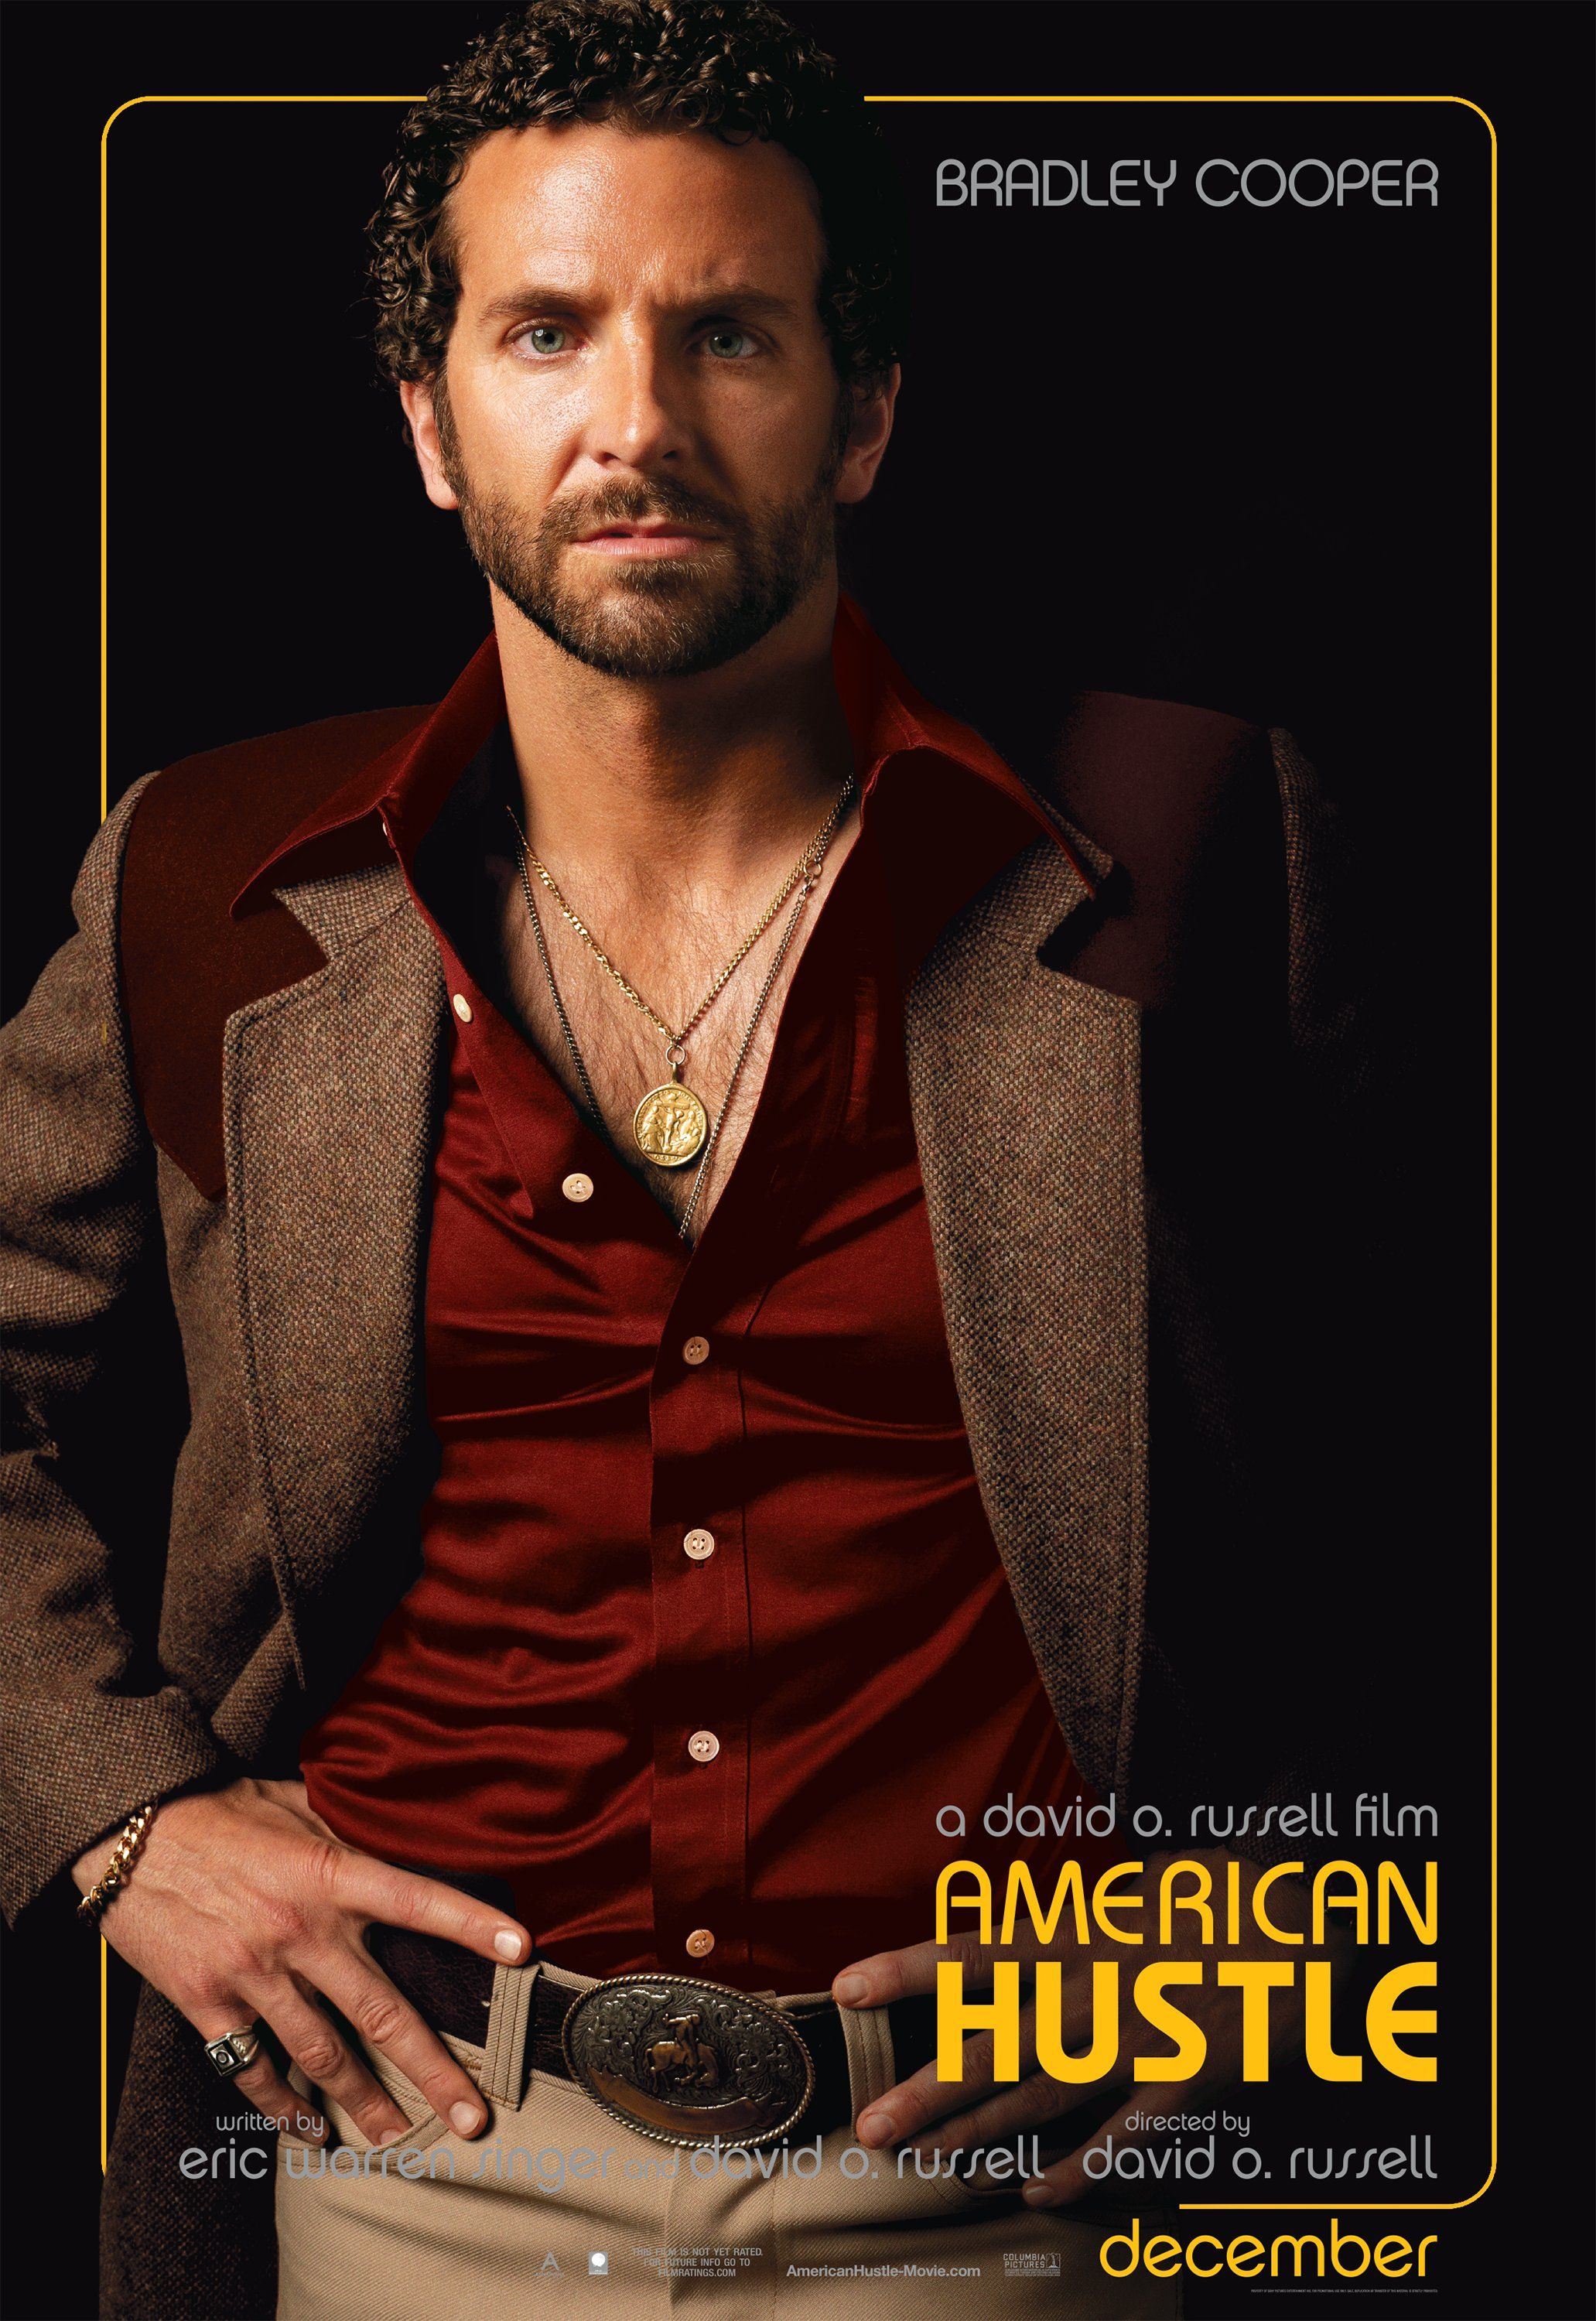 AMERICAN HUSTLE Character Posters with Christian Bale, Bradley Cooper, Jeremy Renner ...